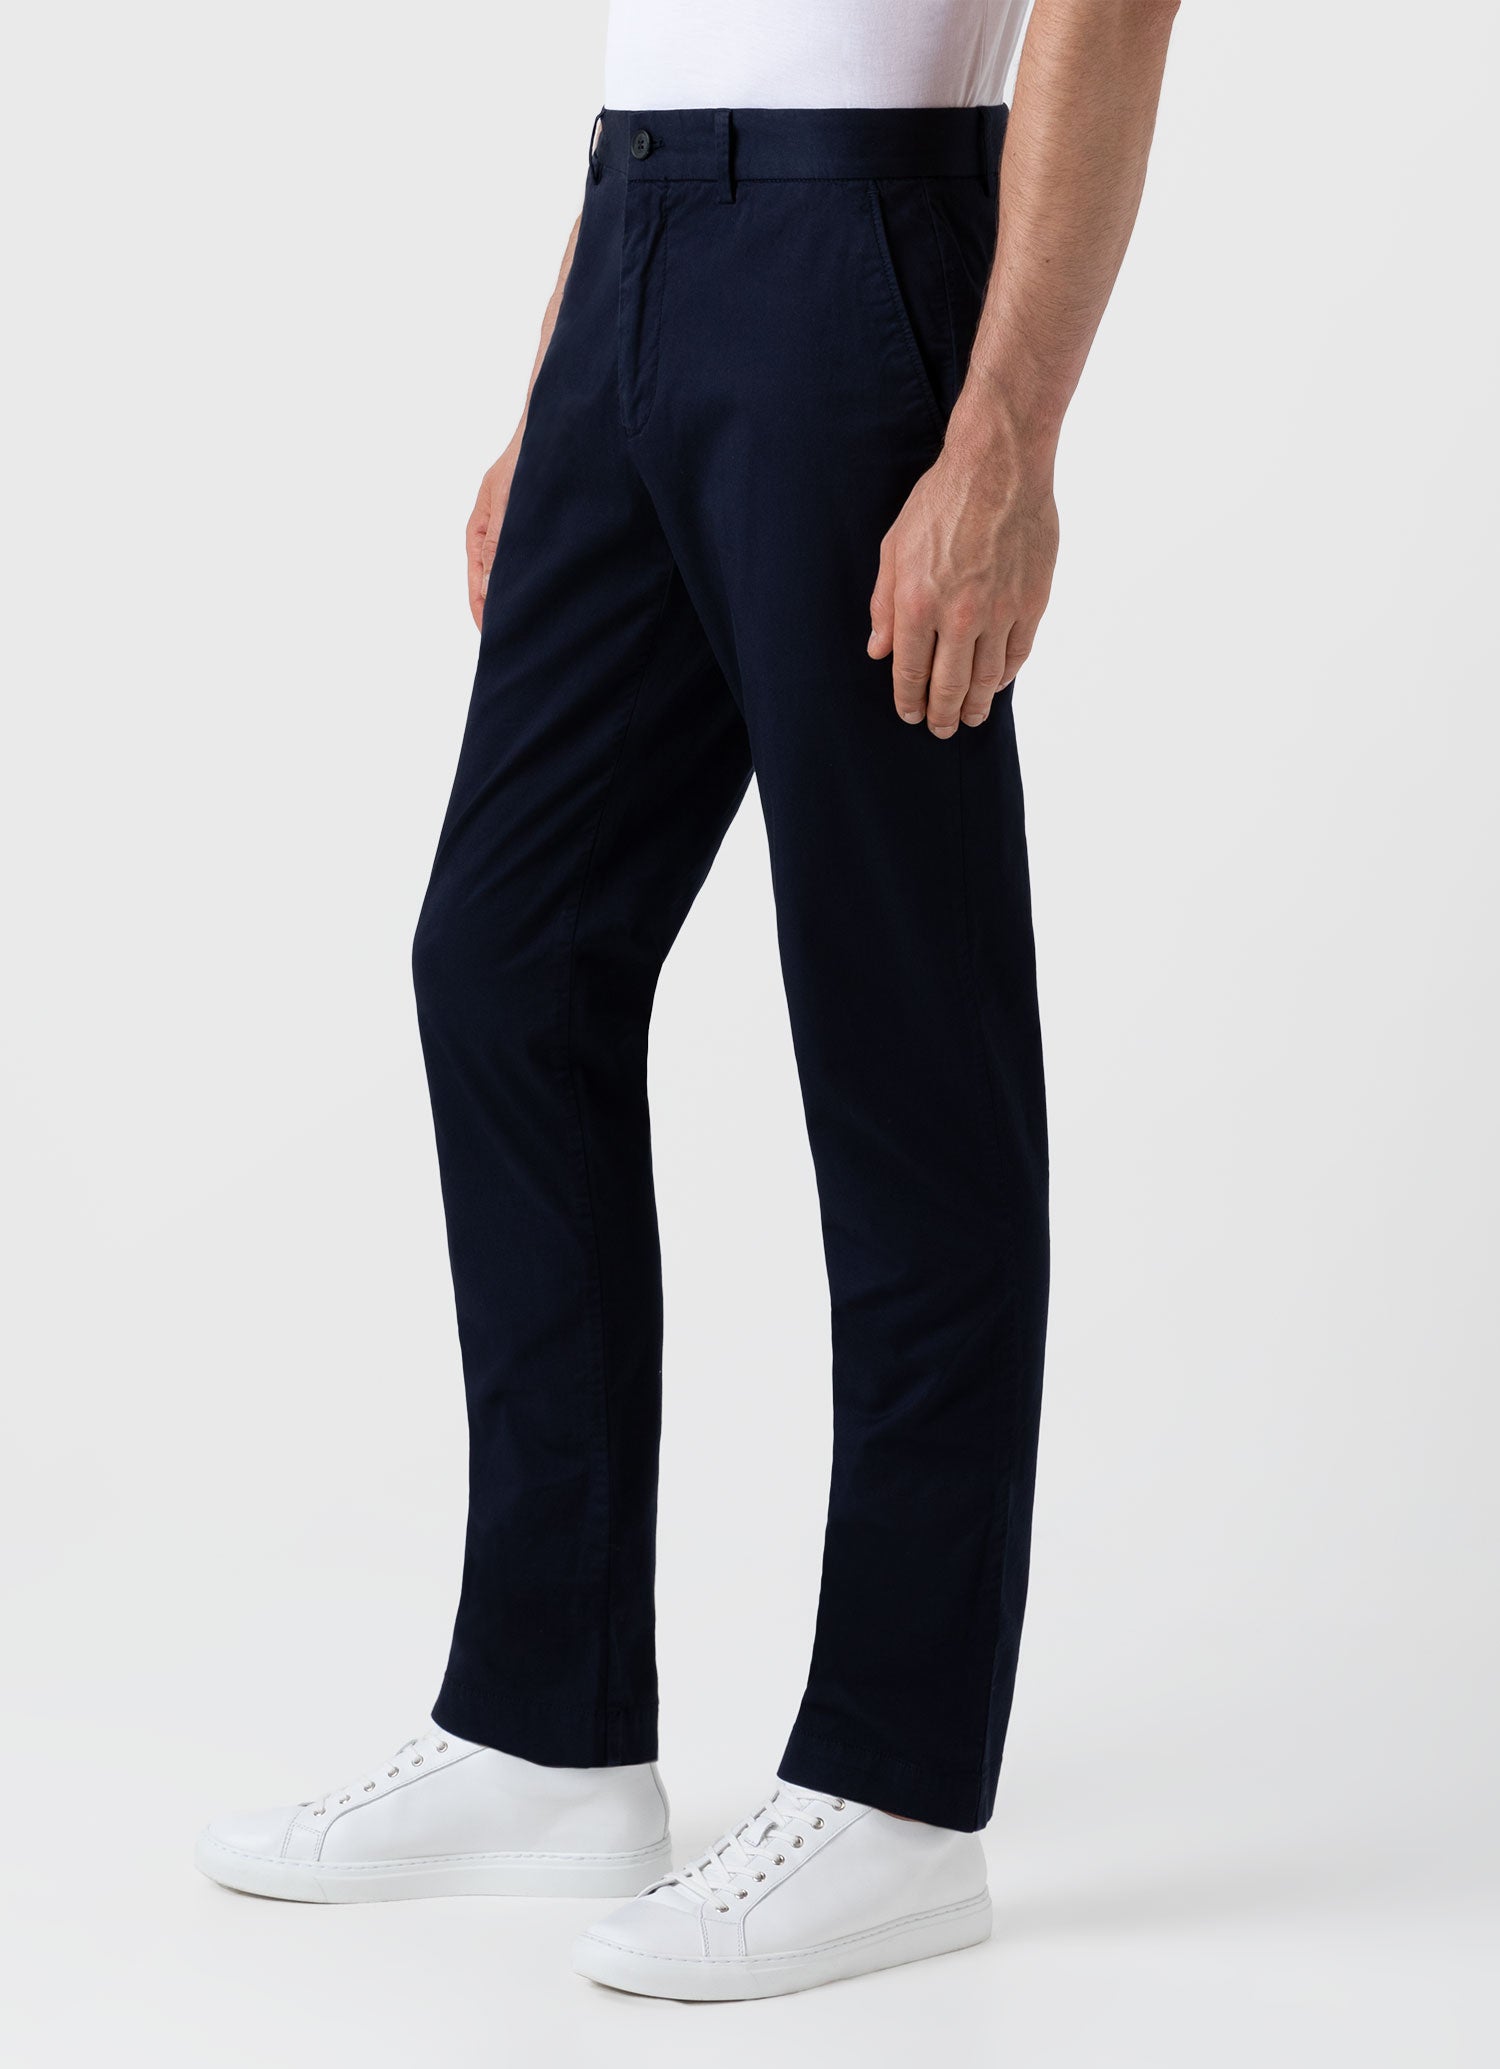 POLO RALPH LAUREN Stretch Slim Fit Performance Chino | Endource